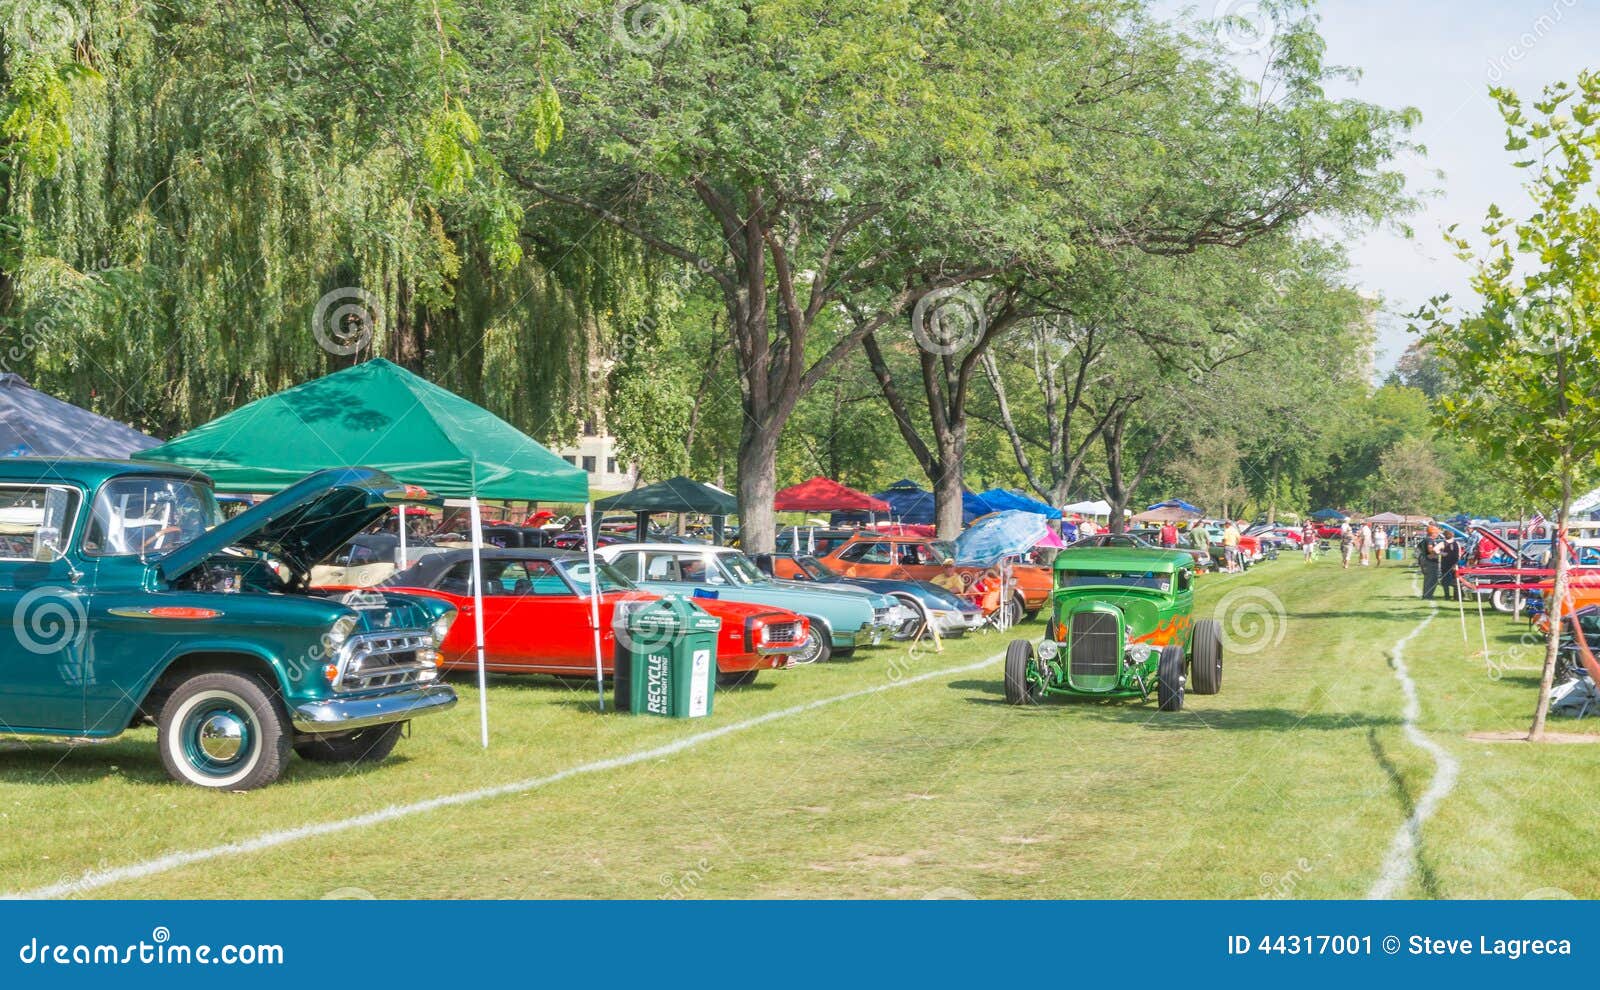 frankenmuth car show hours